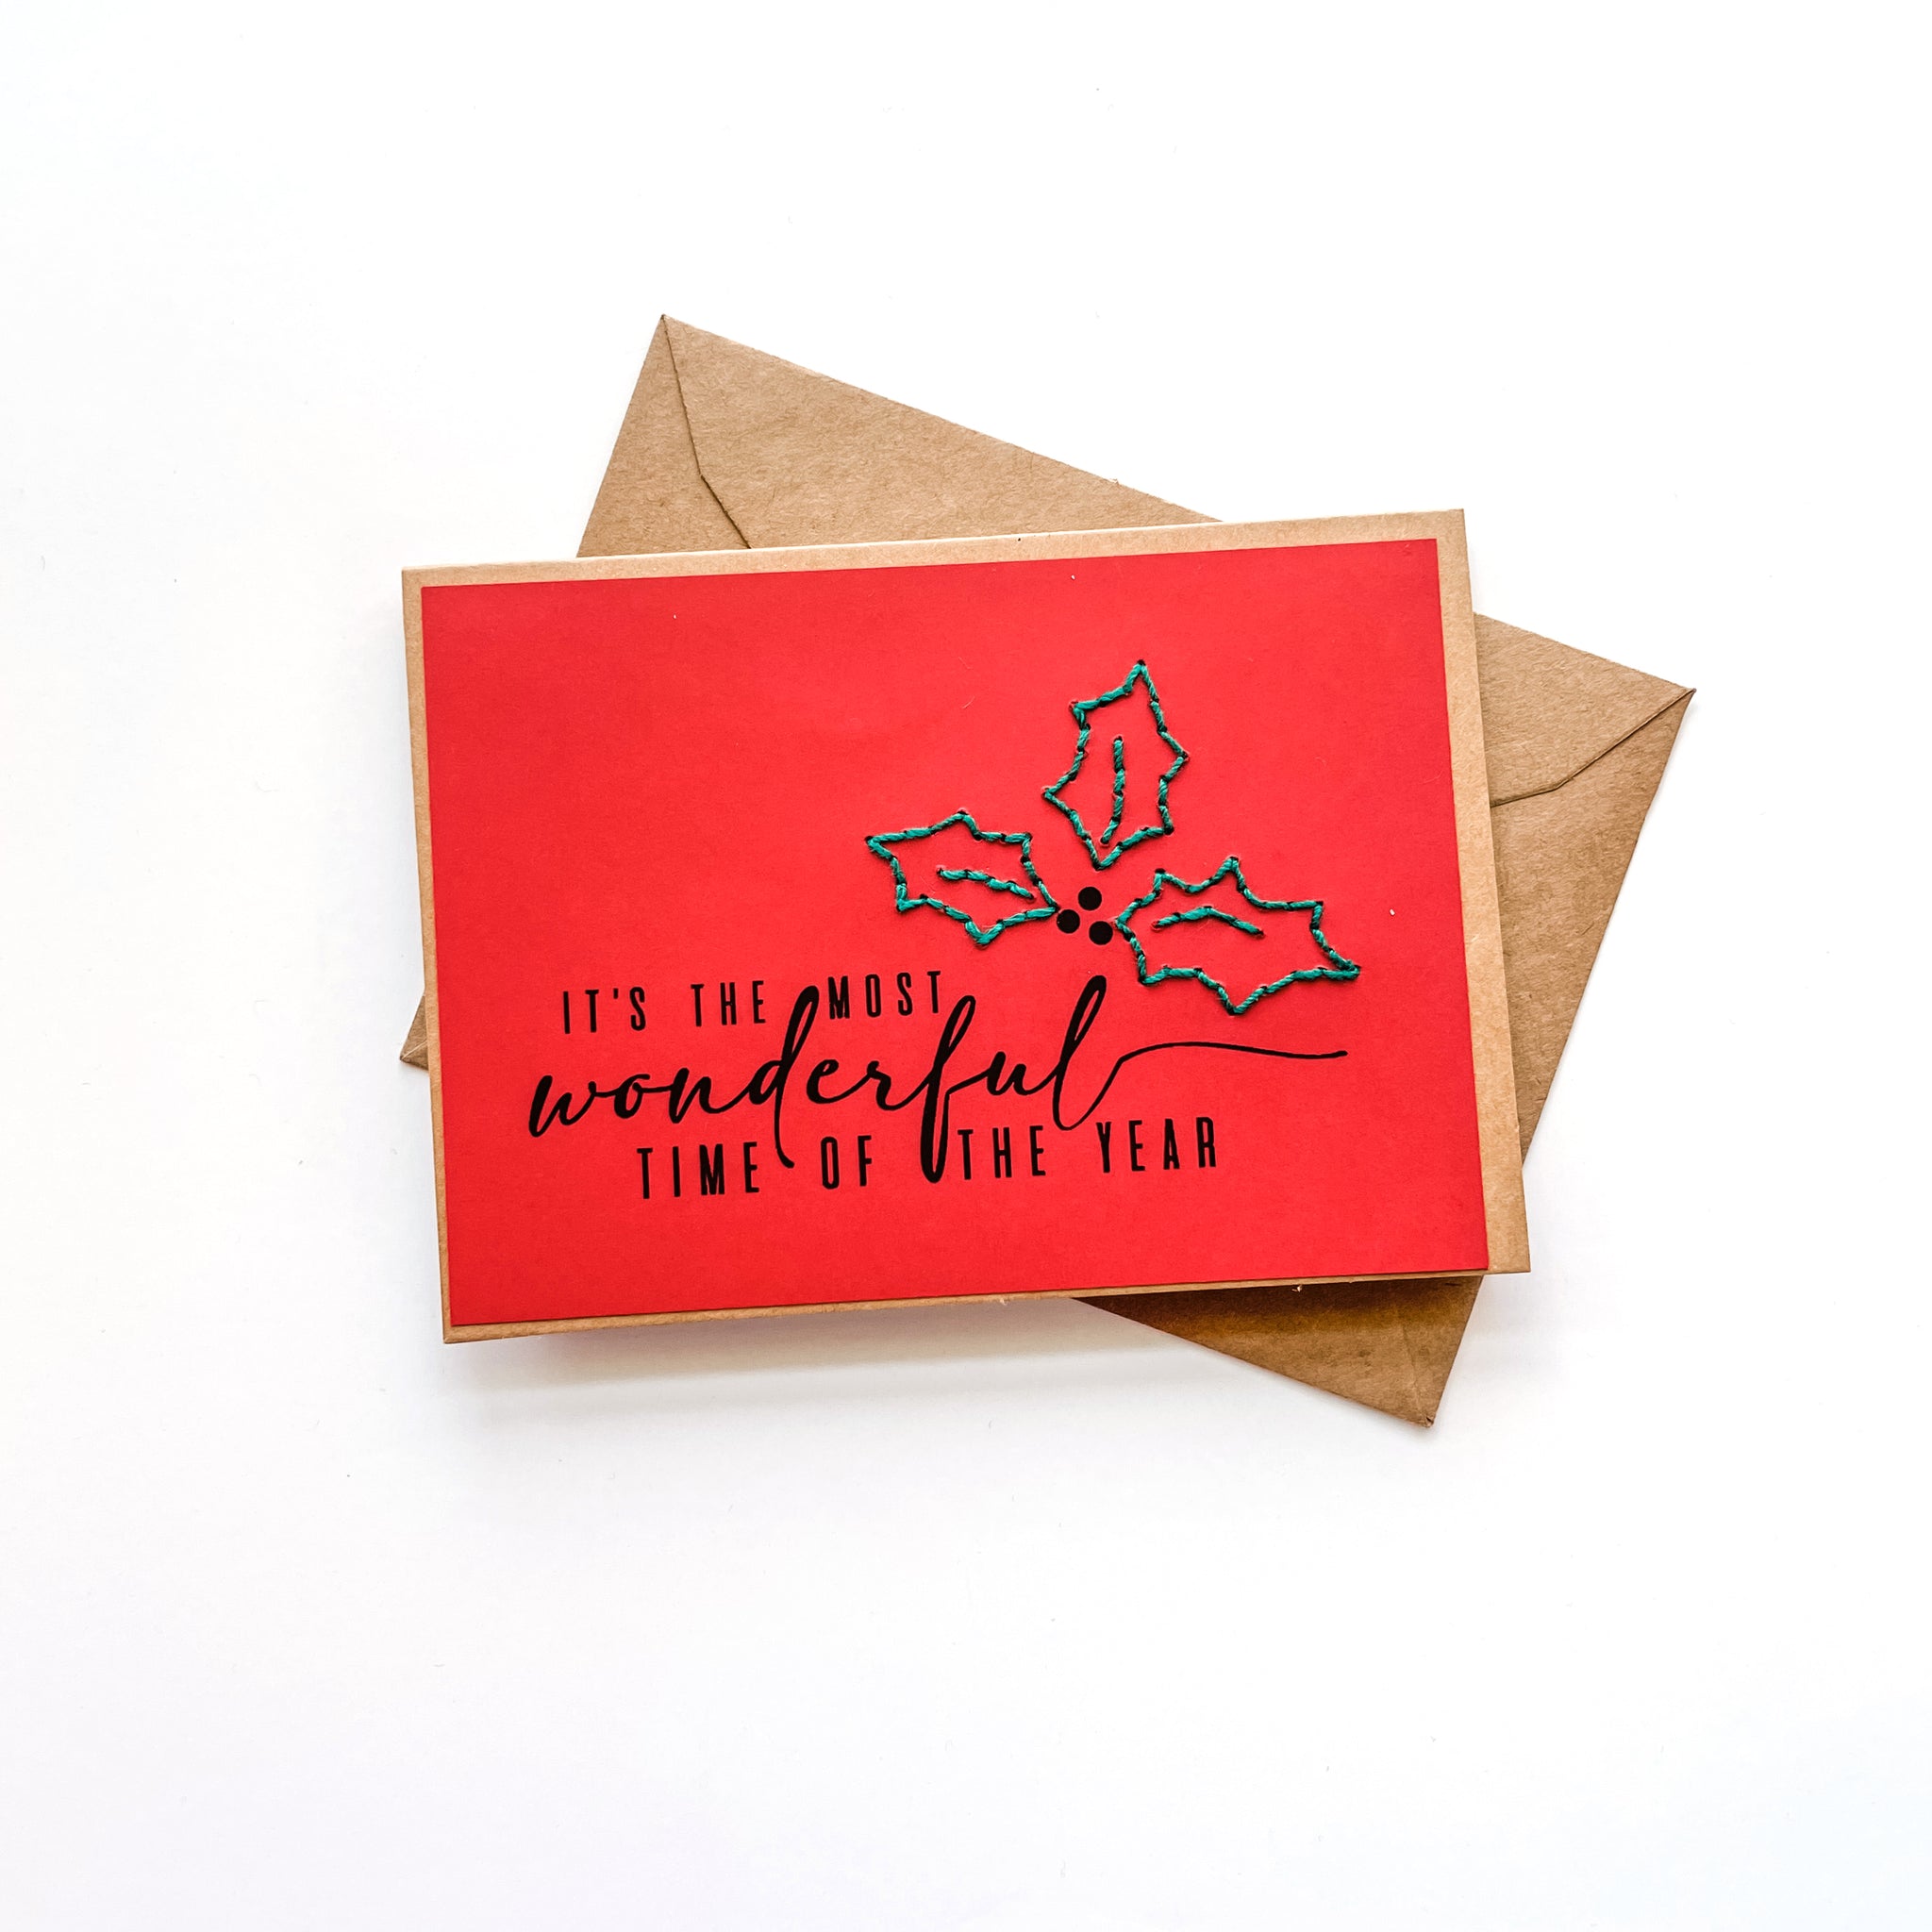 Rosie's Christmas Cards - Merry and Bright Set (set of 4) - FMSCMarketplace.org